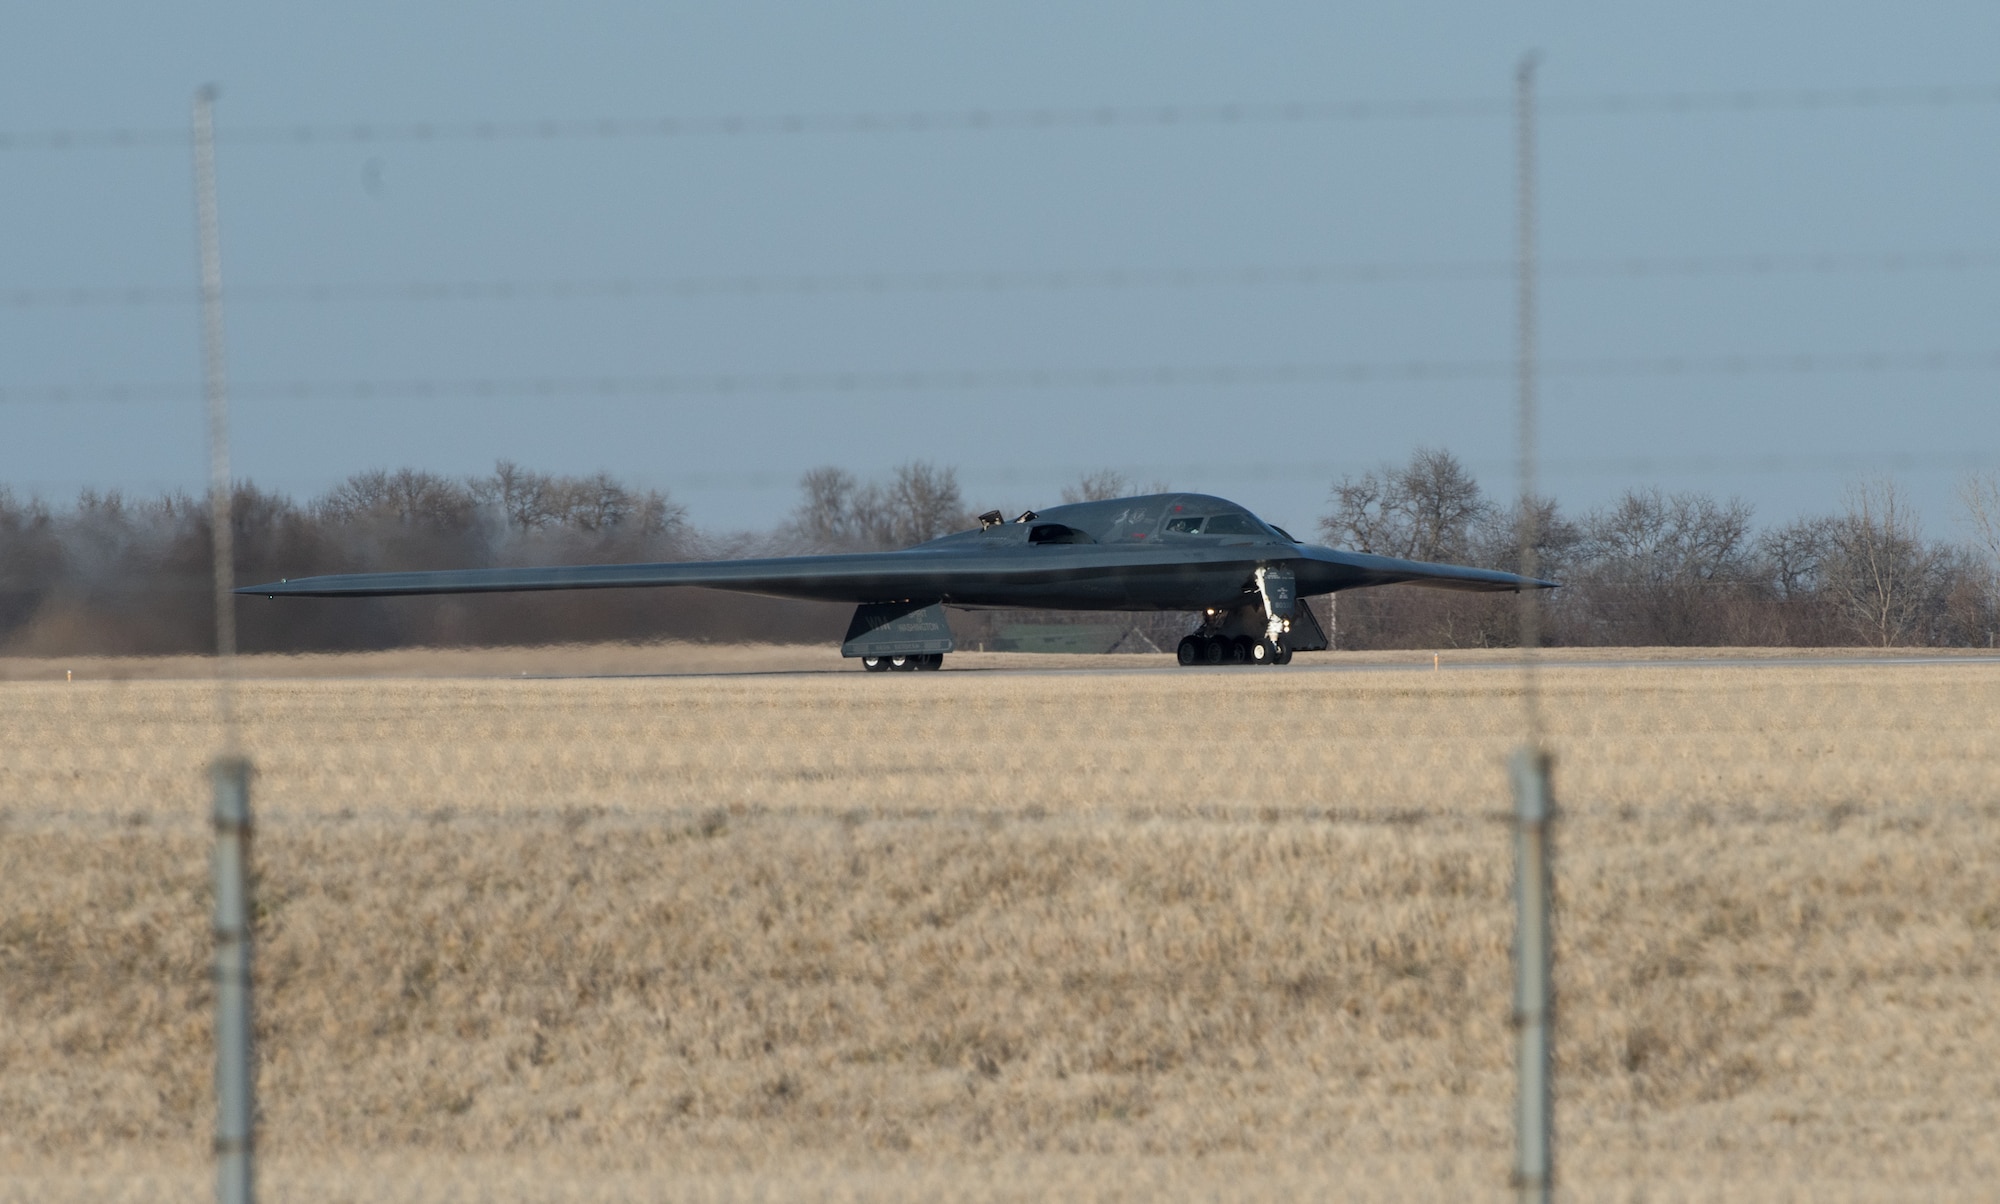 A B-2 Spirit Stealth Bomber takes off at Whiteman Air Force Base, Missouri, March 8, 2020. The B-2 is slated to support U.S. Strategic Command Bomber Task Force operations in Europe. These missions provide opportunities to train and work with our allies and partners in joint and coalition operations and exercises. (U.S. Air Force photo by Airman 1st Class Christina Carter)